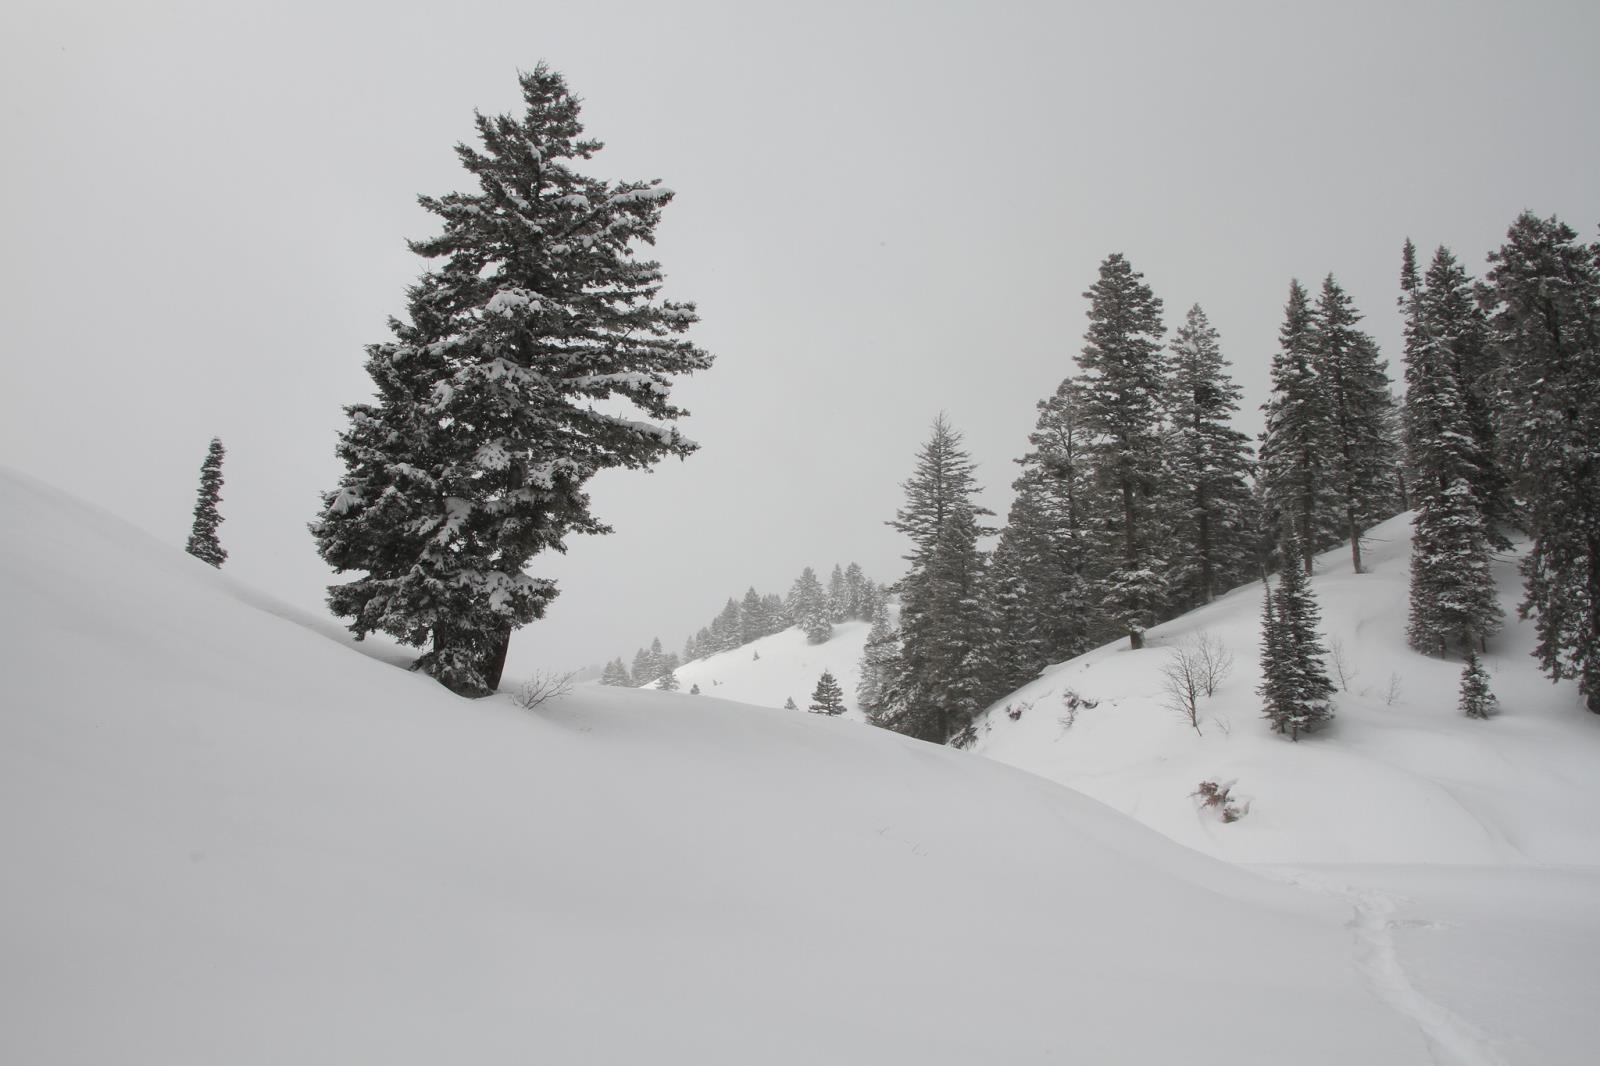 Snowpack levels in Idaho mountains were well above normal following a series of storms that brought much-needed moisture to most of the state. 